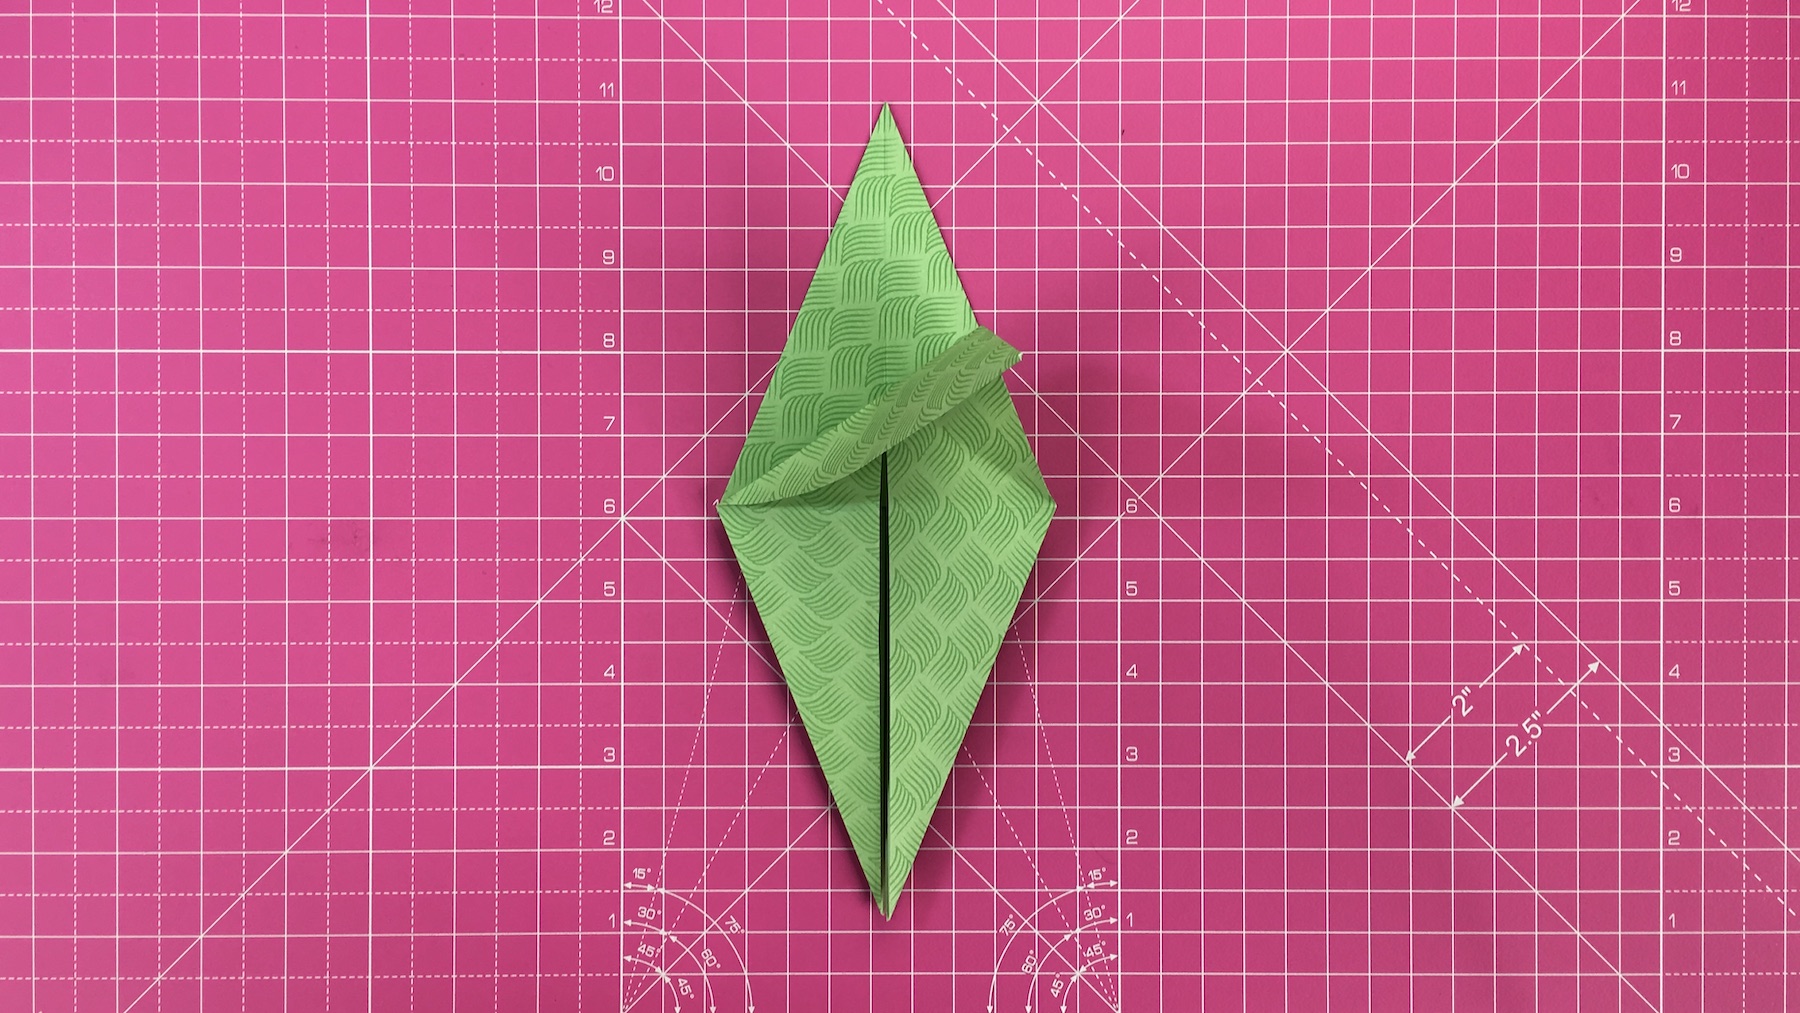 How to make an origami dragon, origami dragon tutorial - step 19a